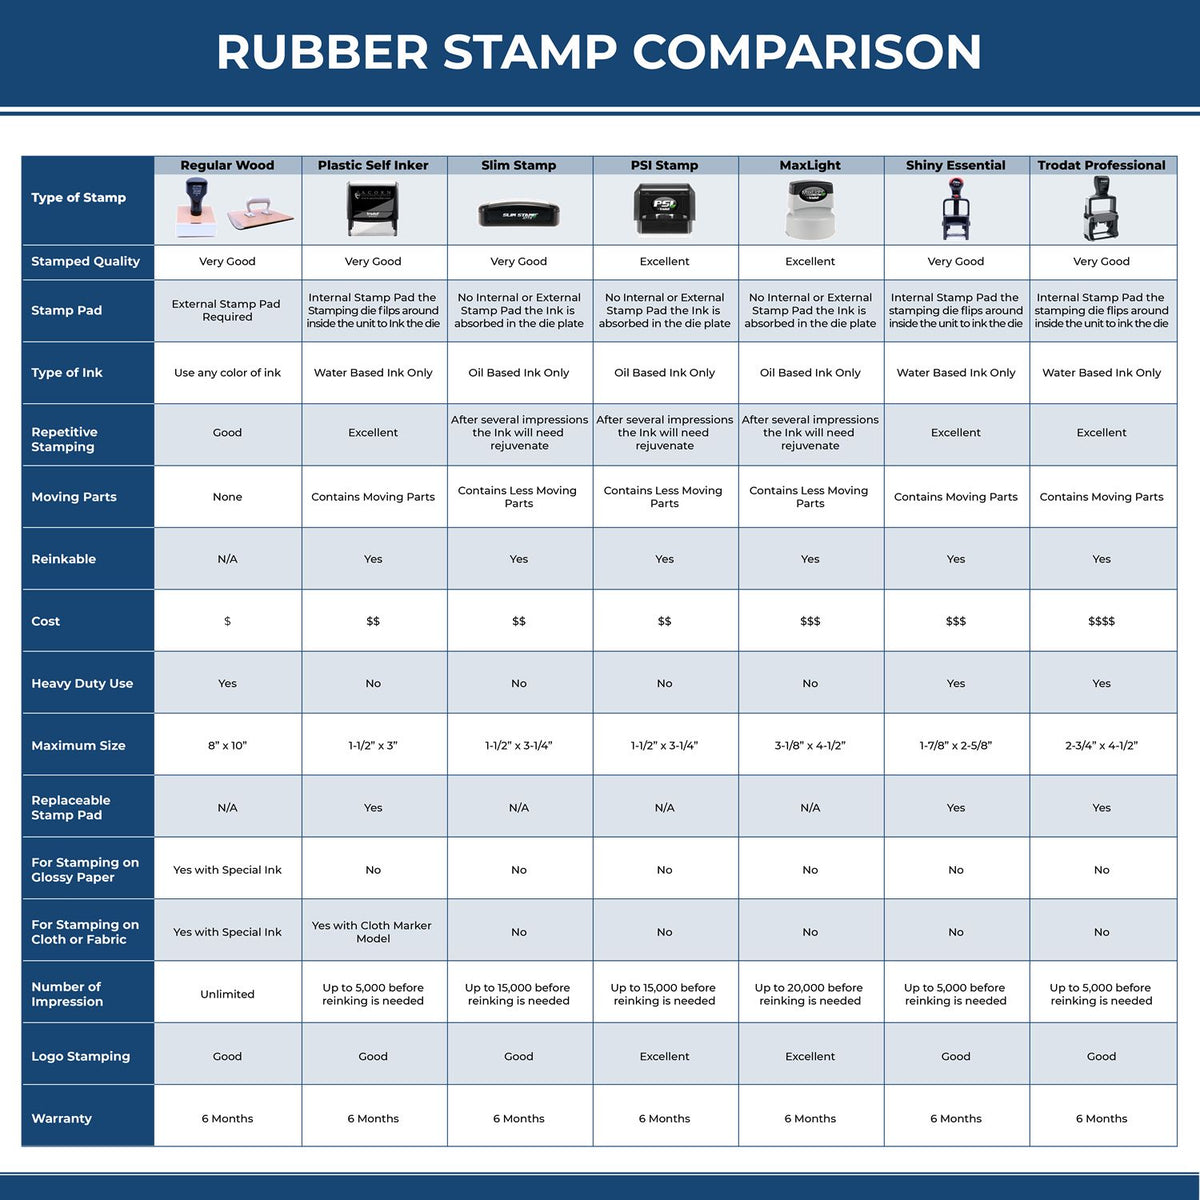 Global Air Parcel Post Rubber Stamp 4194R Rubber Stamp Comparison